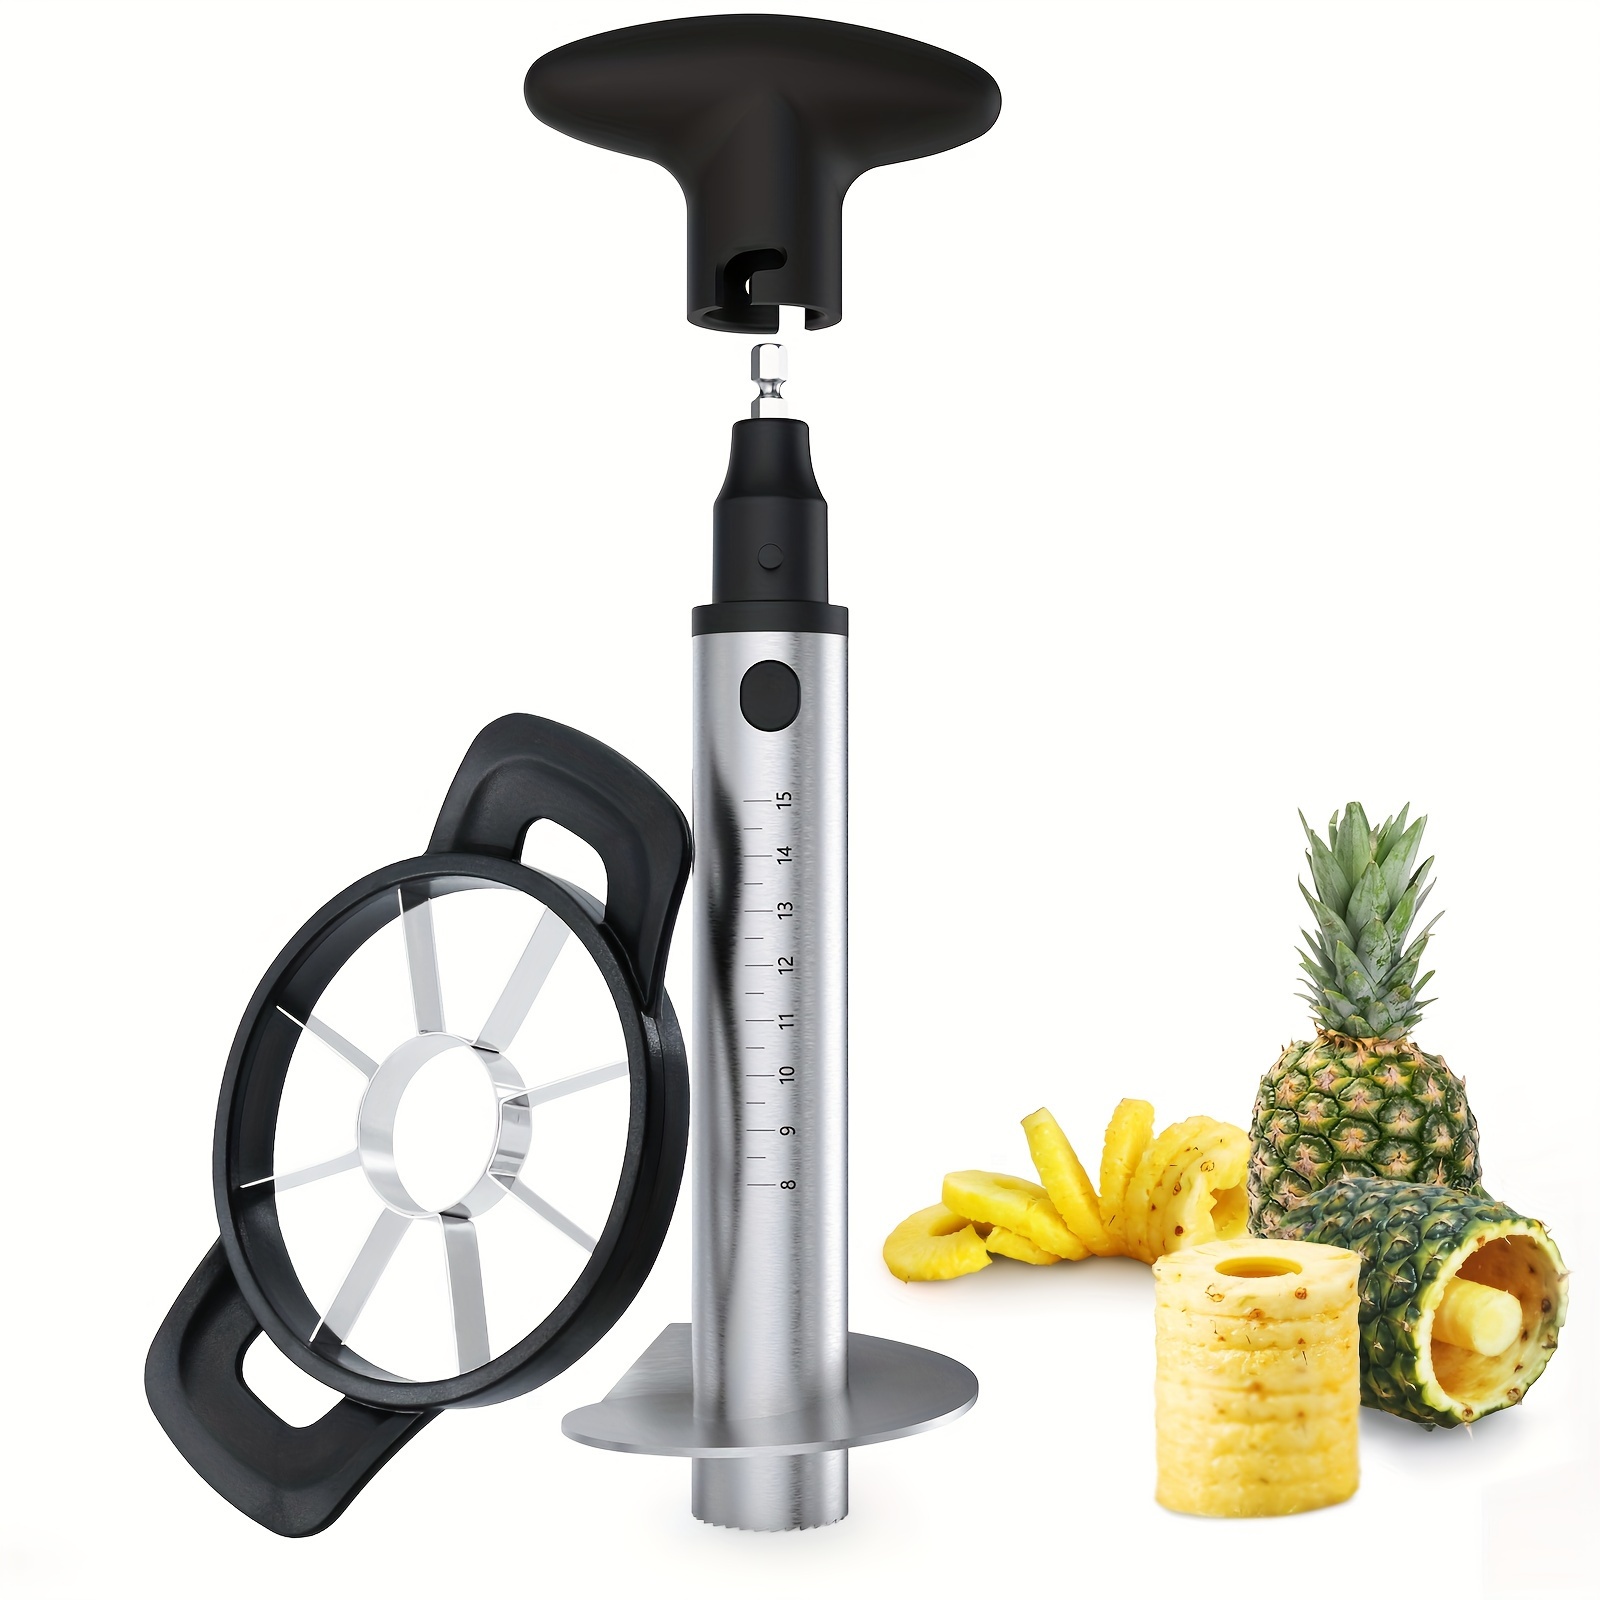 

Pineapple Corer Cutter, [upgraded, Electric & Manual] Stainless Steel Fruit Pineapple Slicer With Electric Drill Accessory [easier & Faster], Sturdy Pineapple Core Remover Kitchen Tool